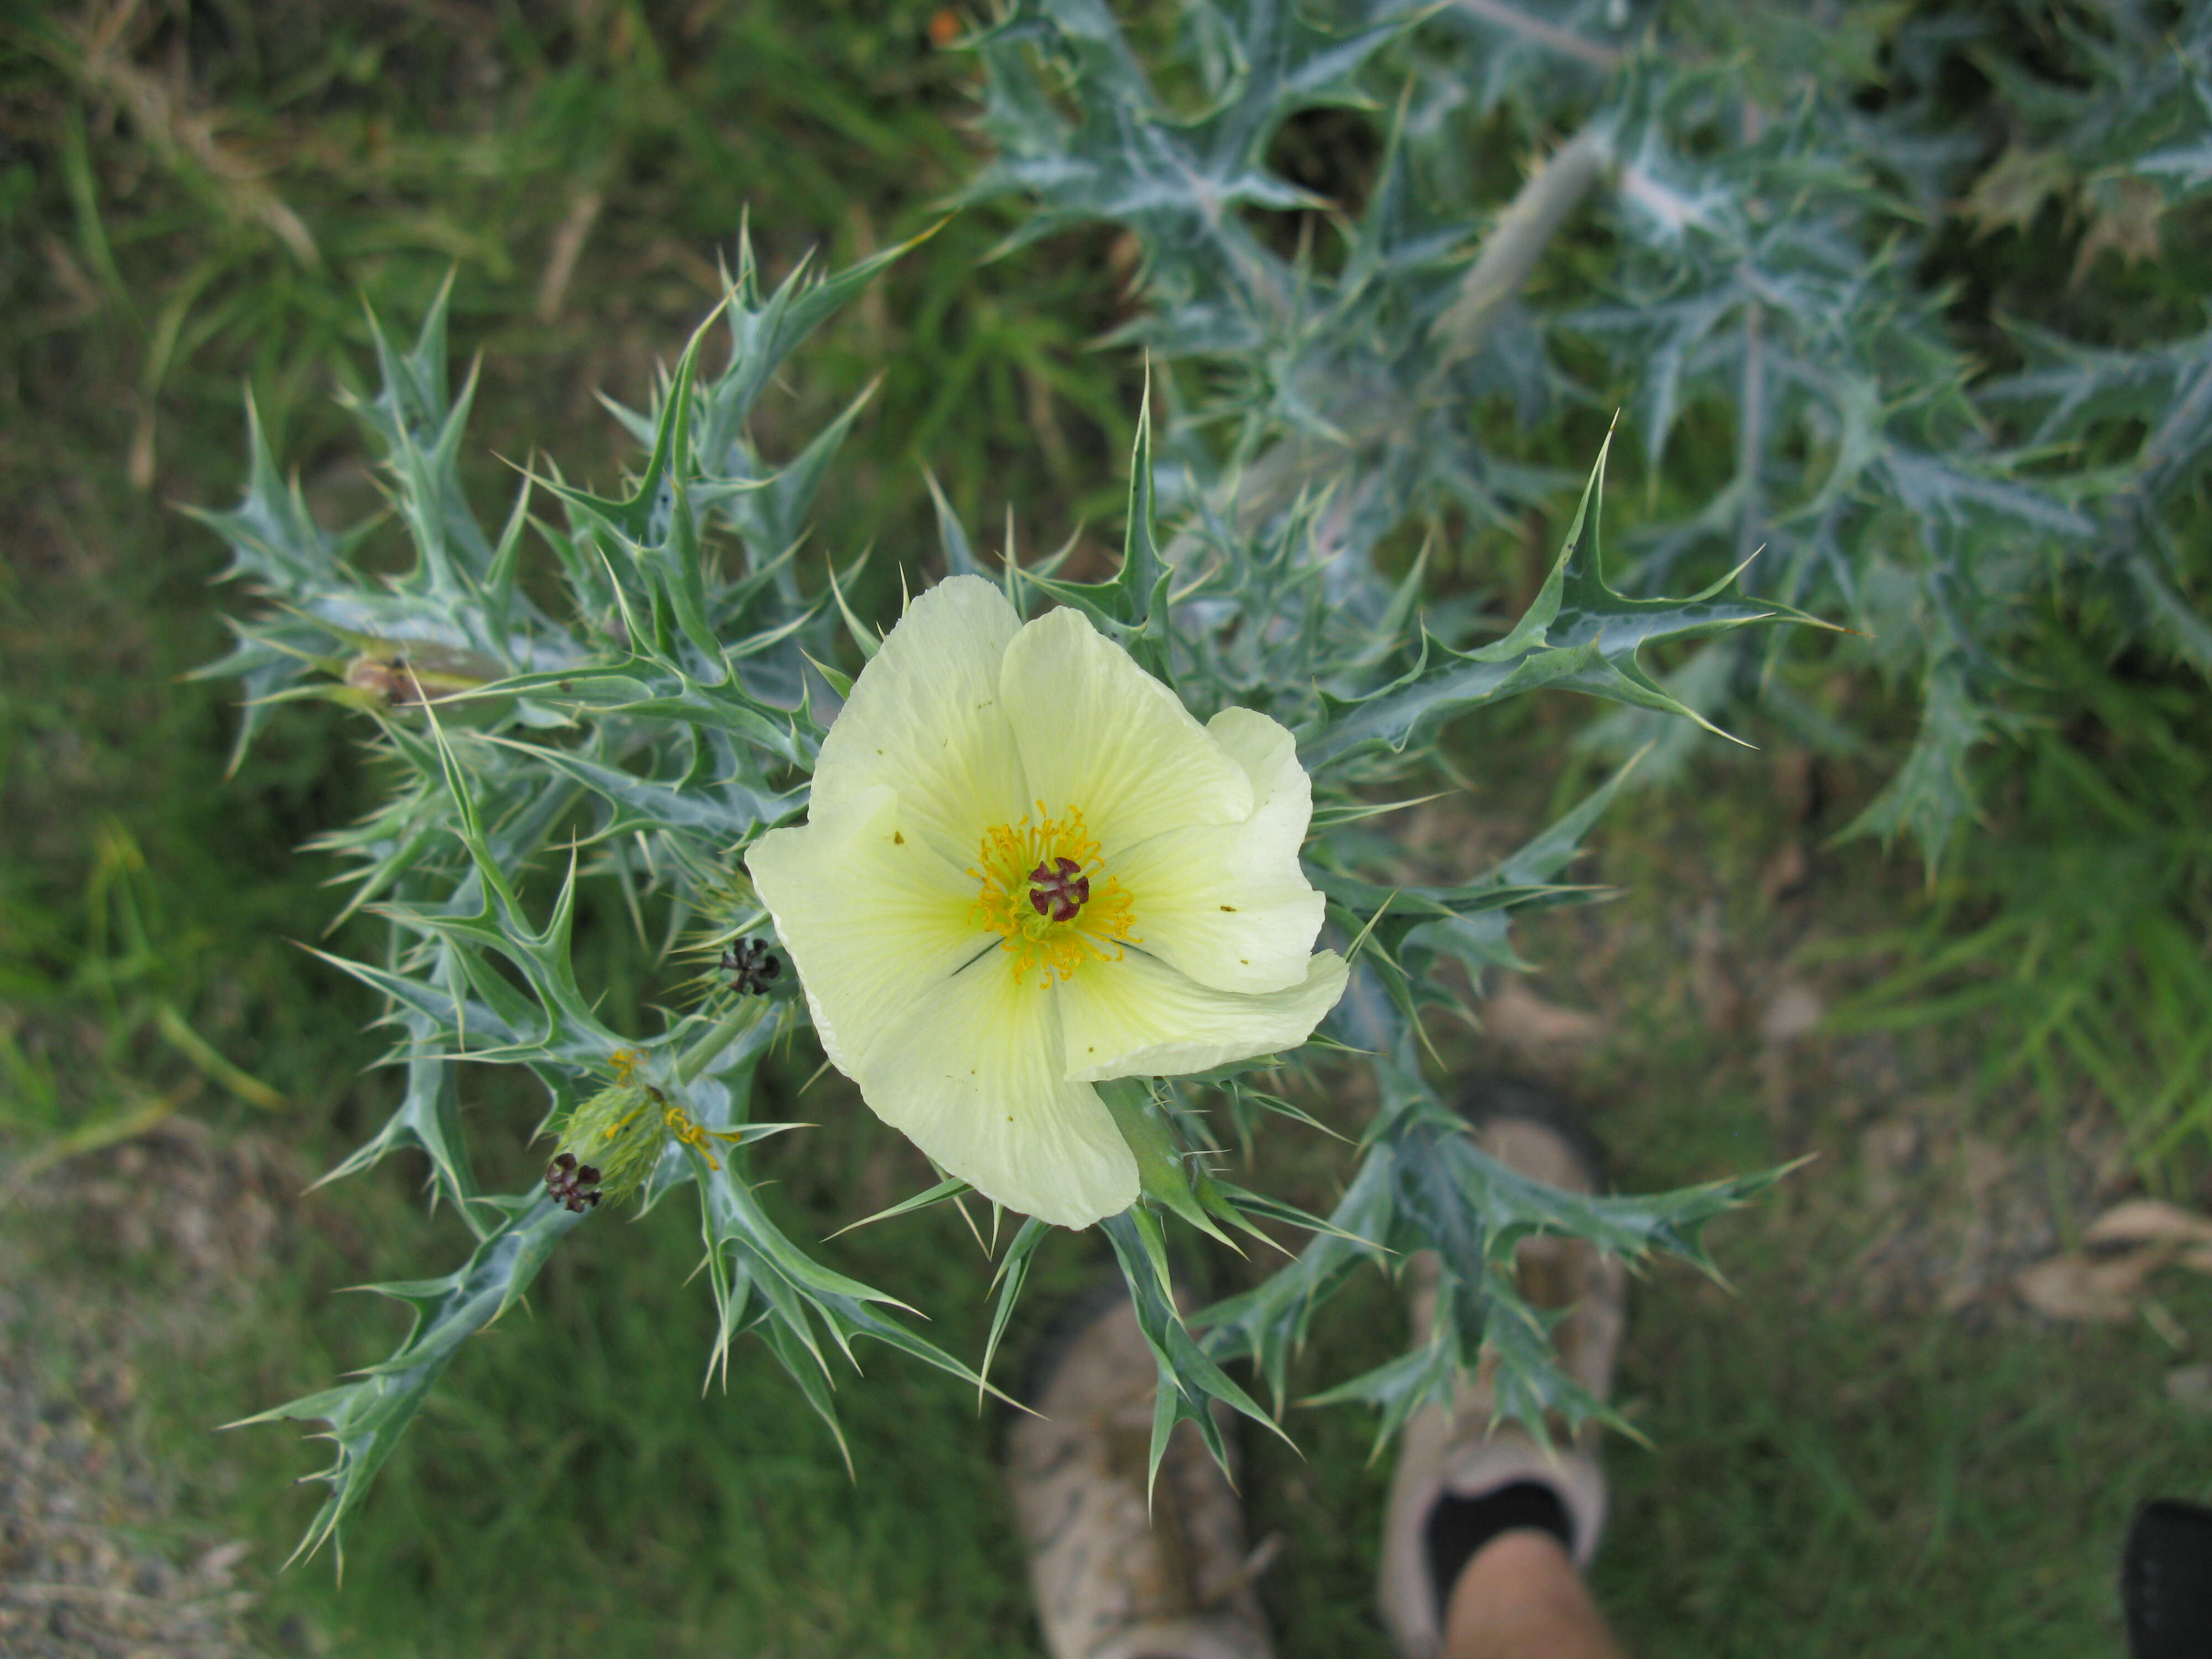 Image of pale Mexican pricklypoppy